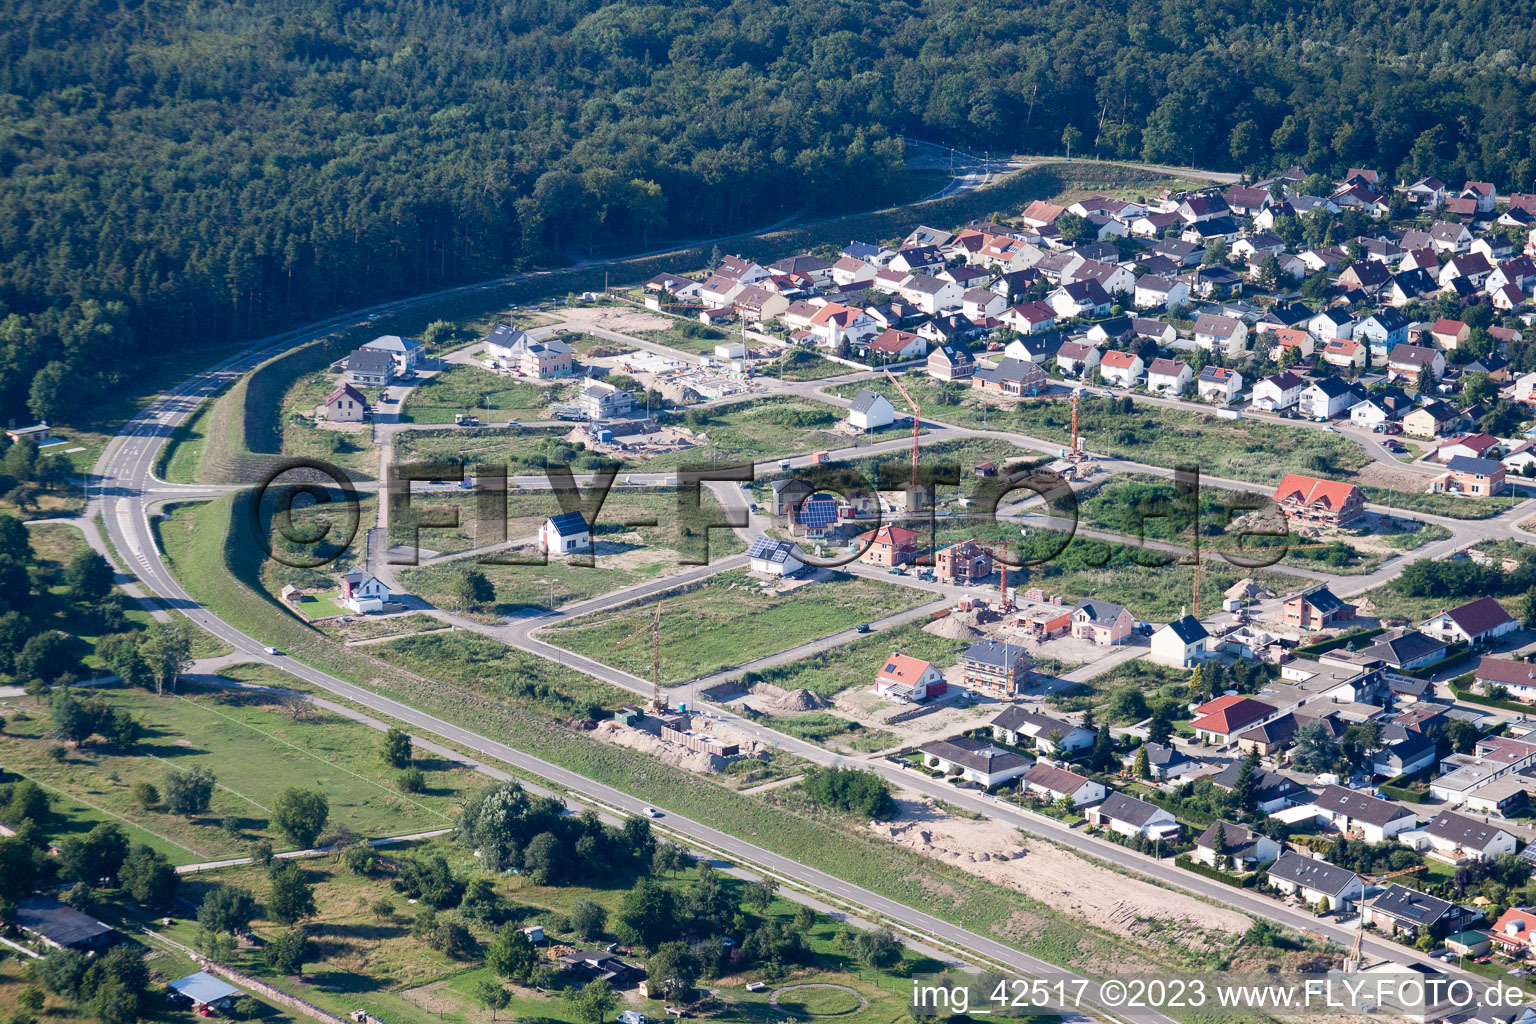 New development area west in Jockgrim in the state Rhineland-Palatinate, Germany viewn from the air